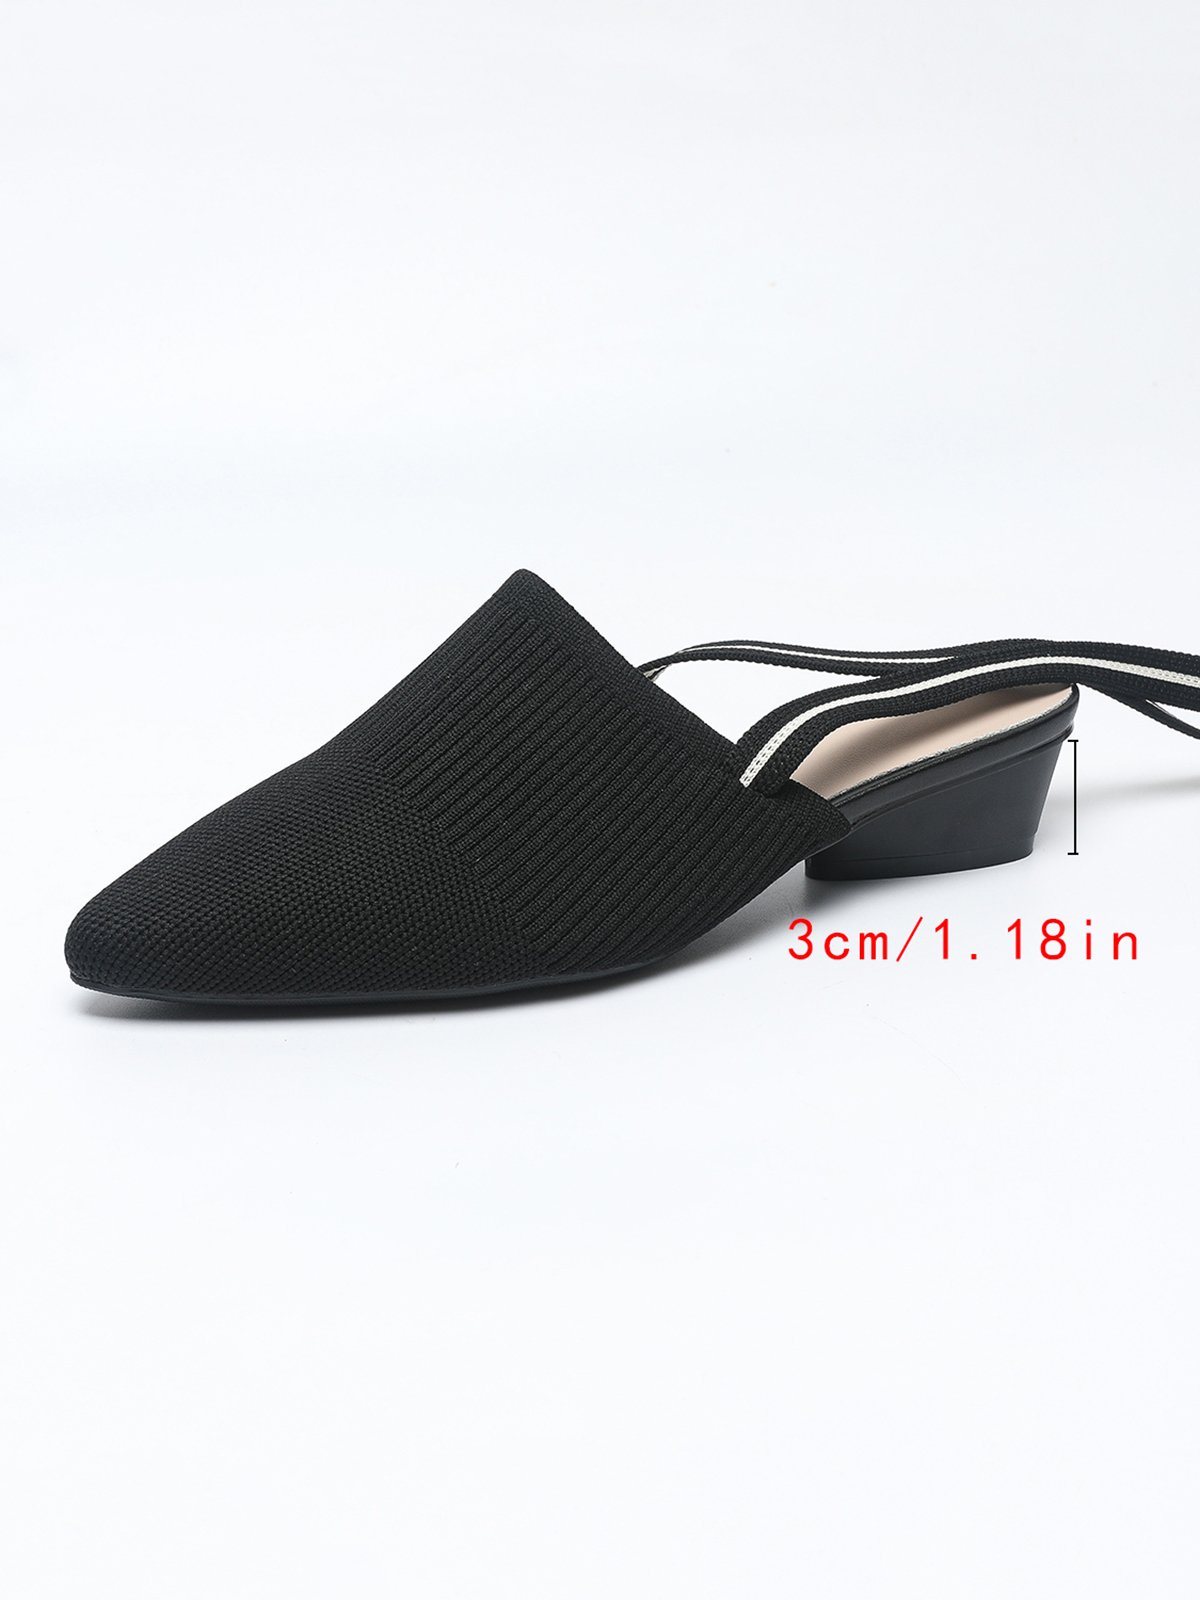 Breathable Mesh Fabric Toe-covered Lace-Up Sandals